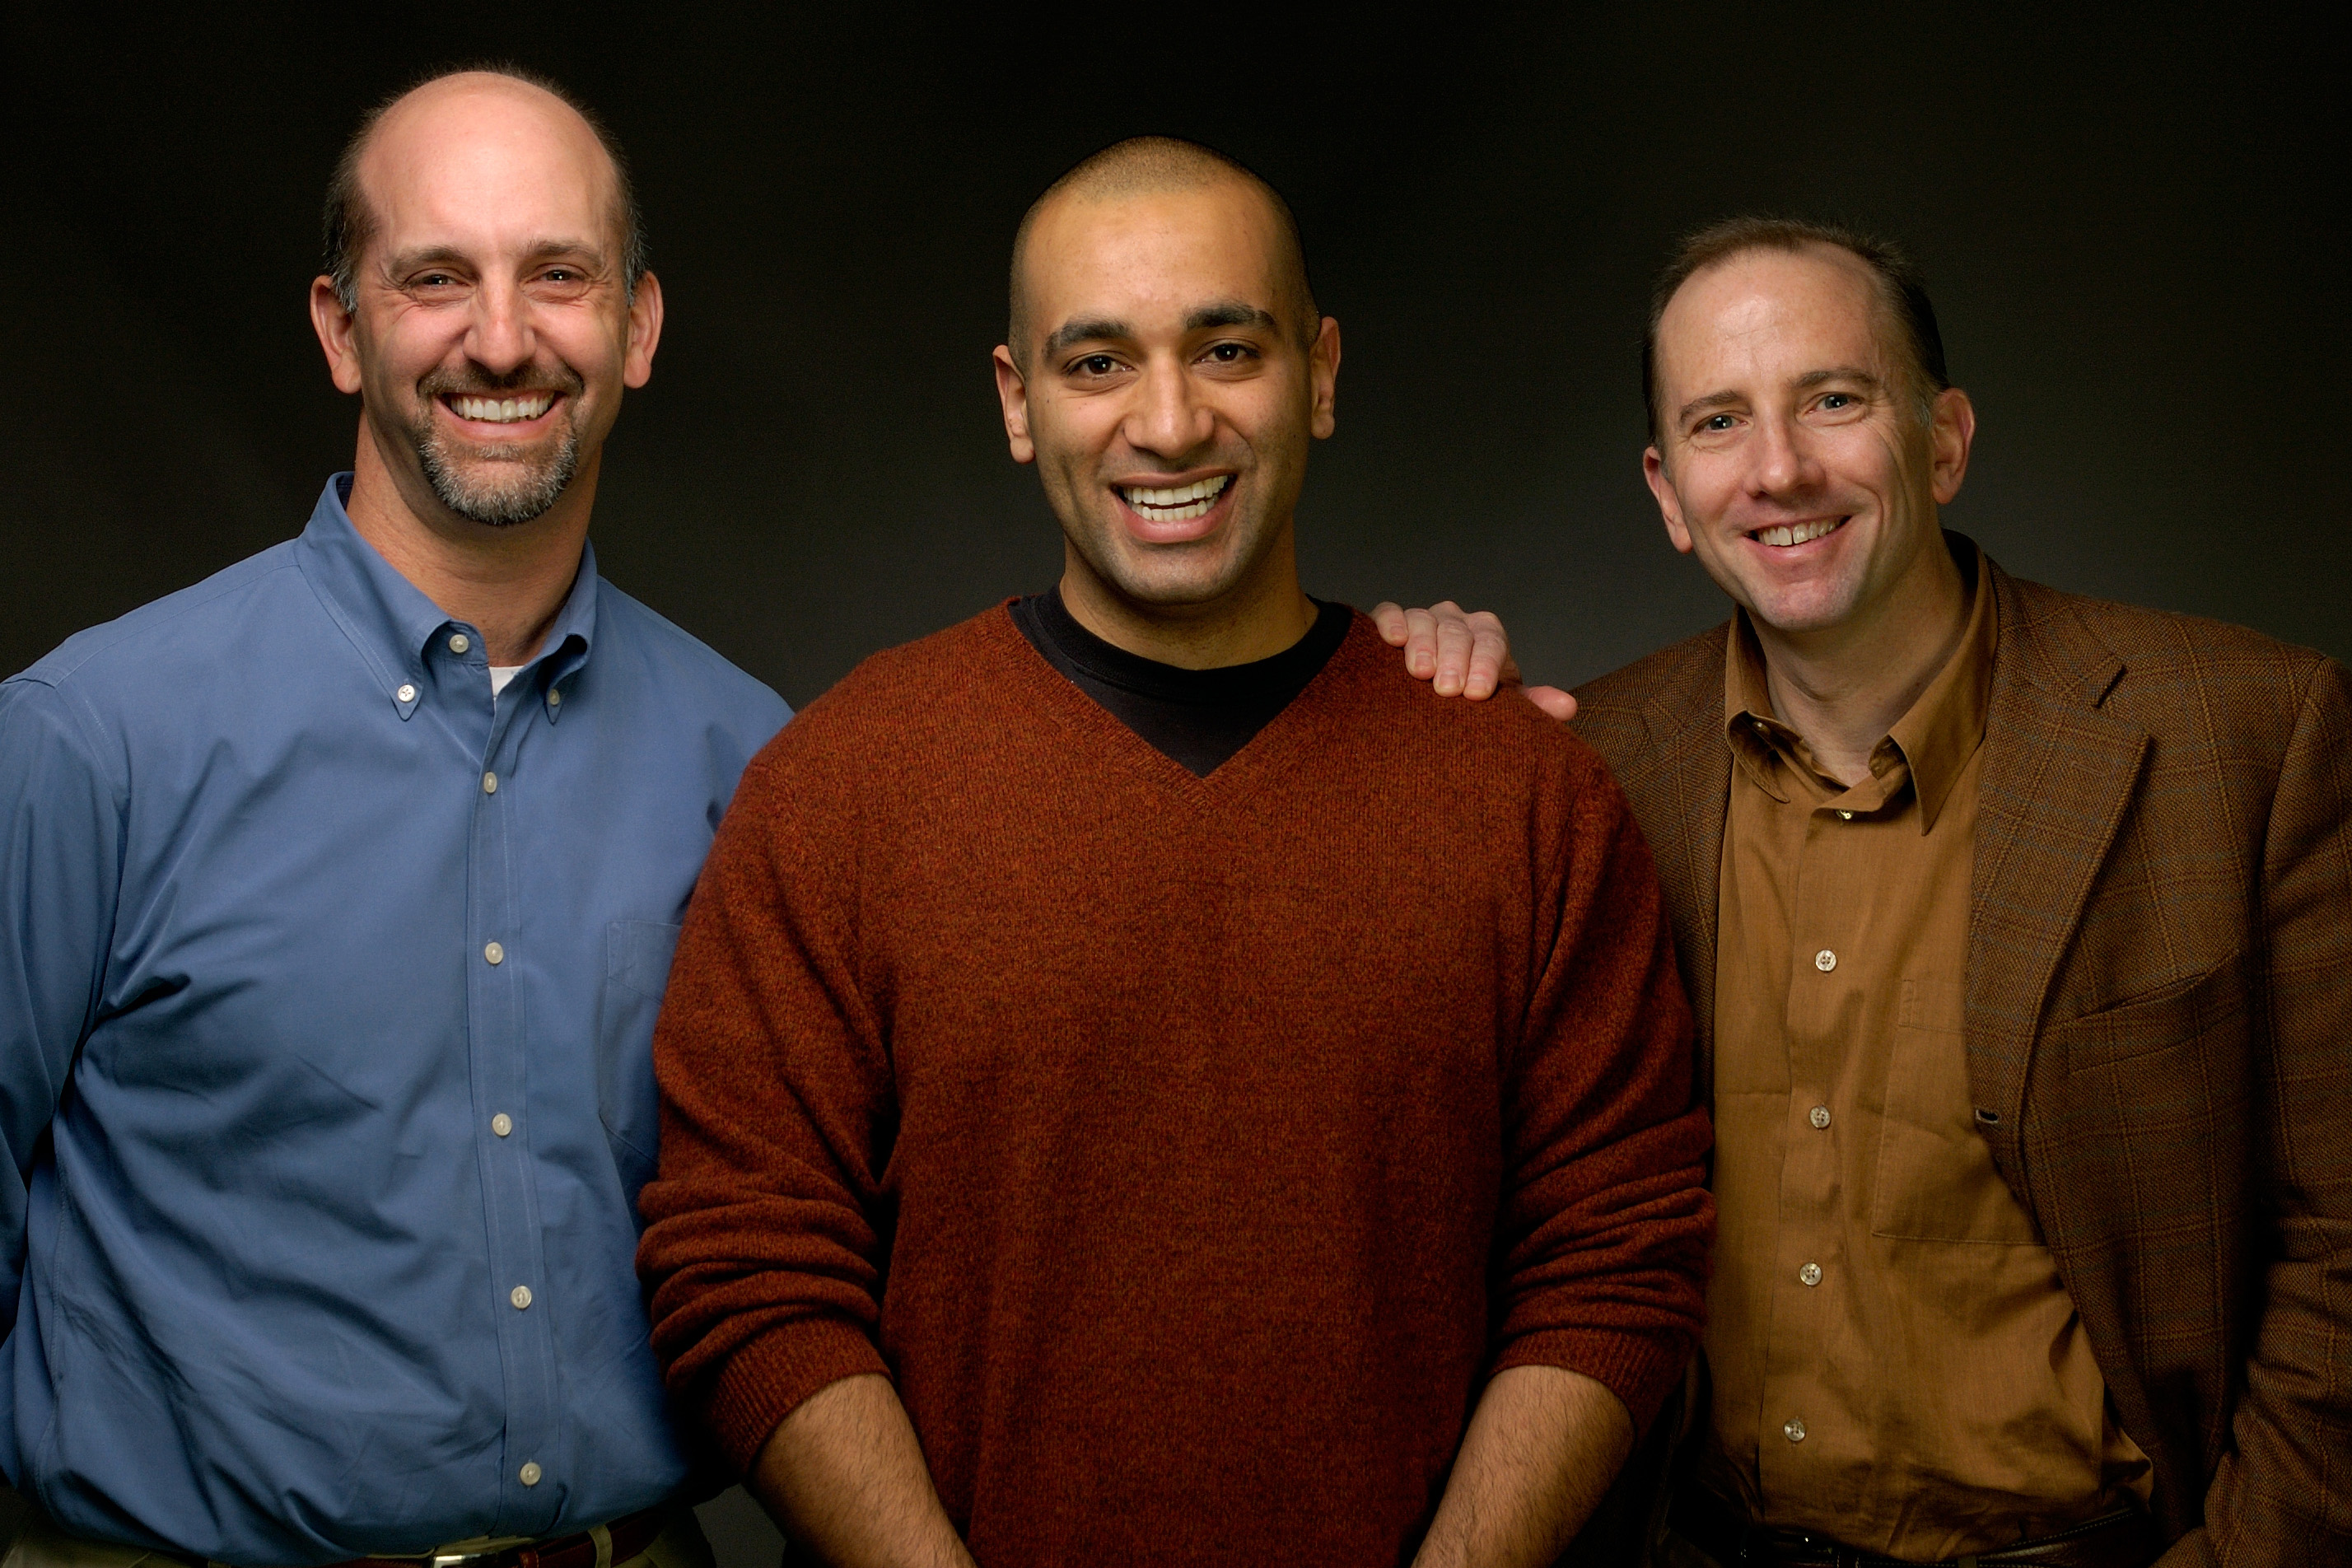 Image of Dr. Daniel Hammer, Peter Ghoroghchian, and Dr. Michael Therien